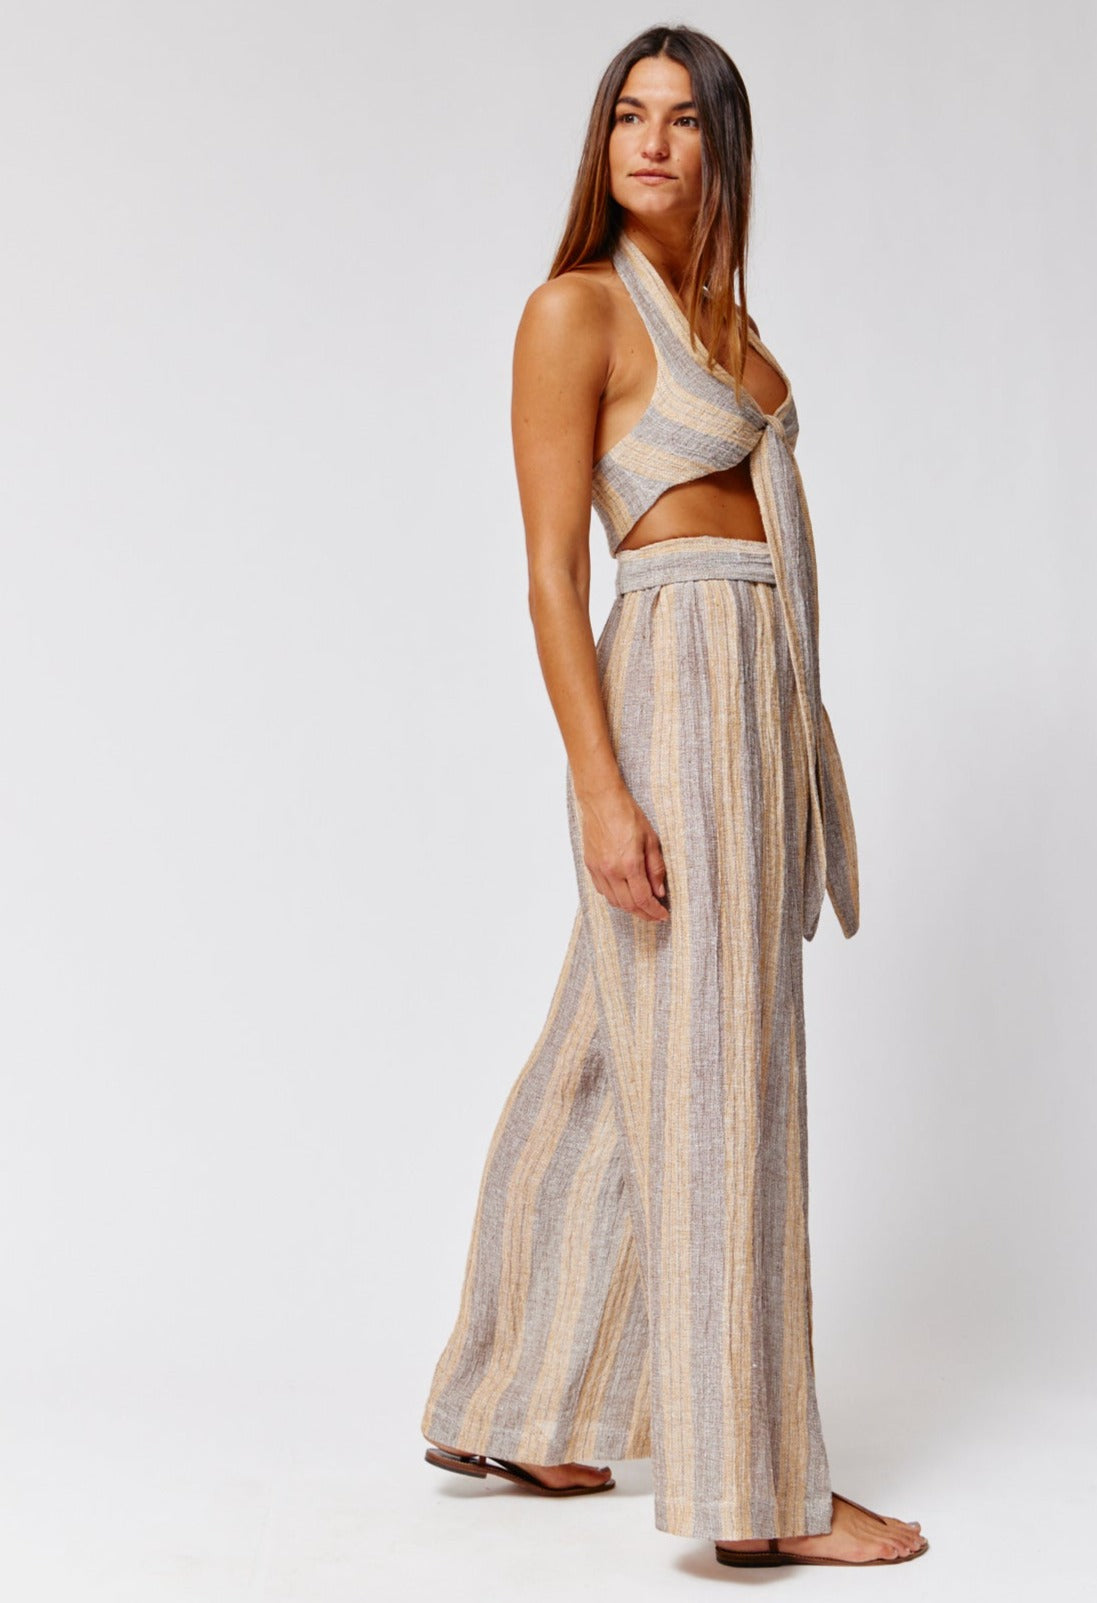 THE FARRAH HALTER TIE TOP in SIENA & NATURAL STRIPED CHIOS GAUZE